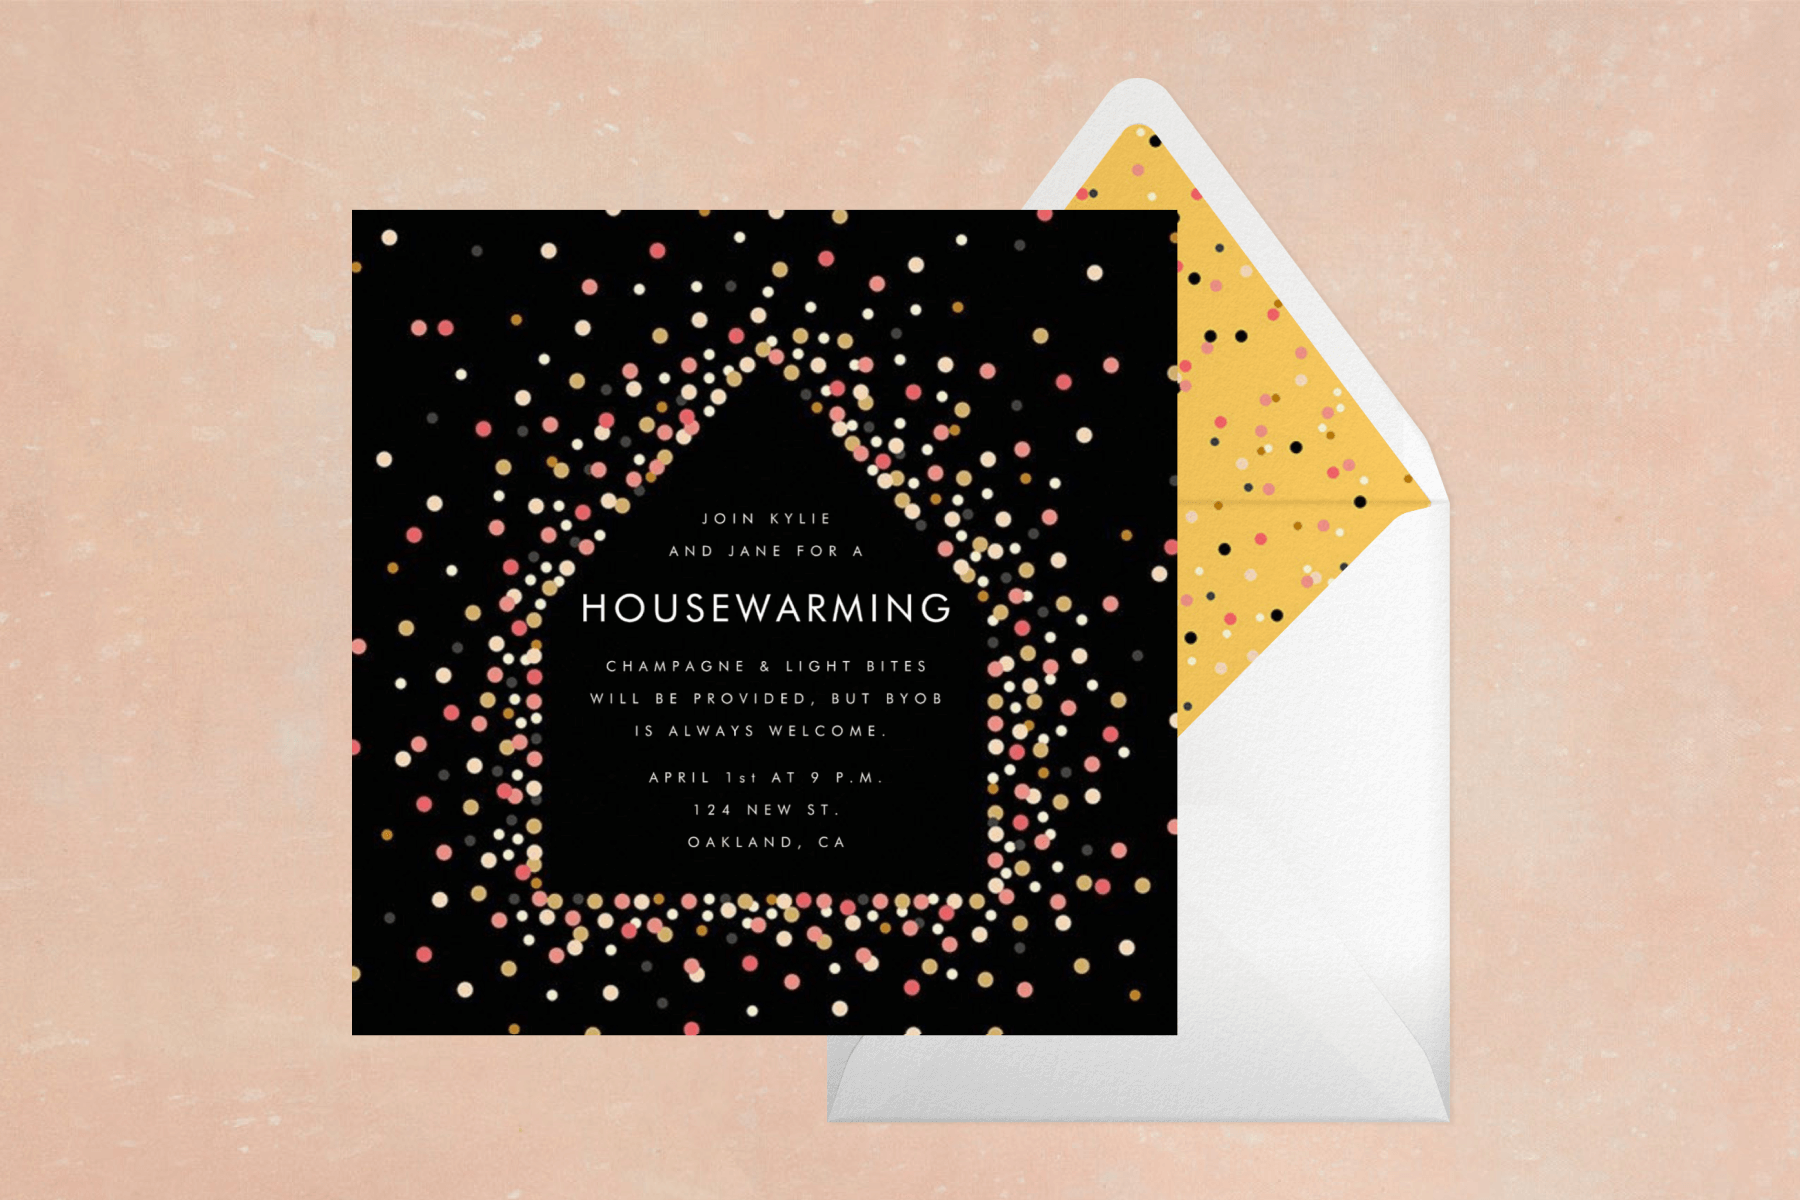 A black, square invitation for a housewarming party with colorful dots forming a simple house shape around the party details beside a white envelope with yellow polka dot liner.